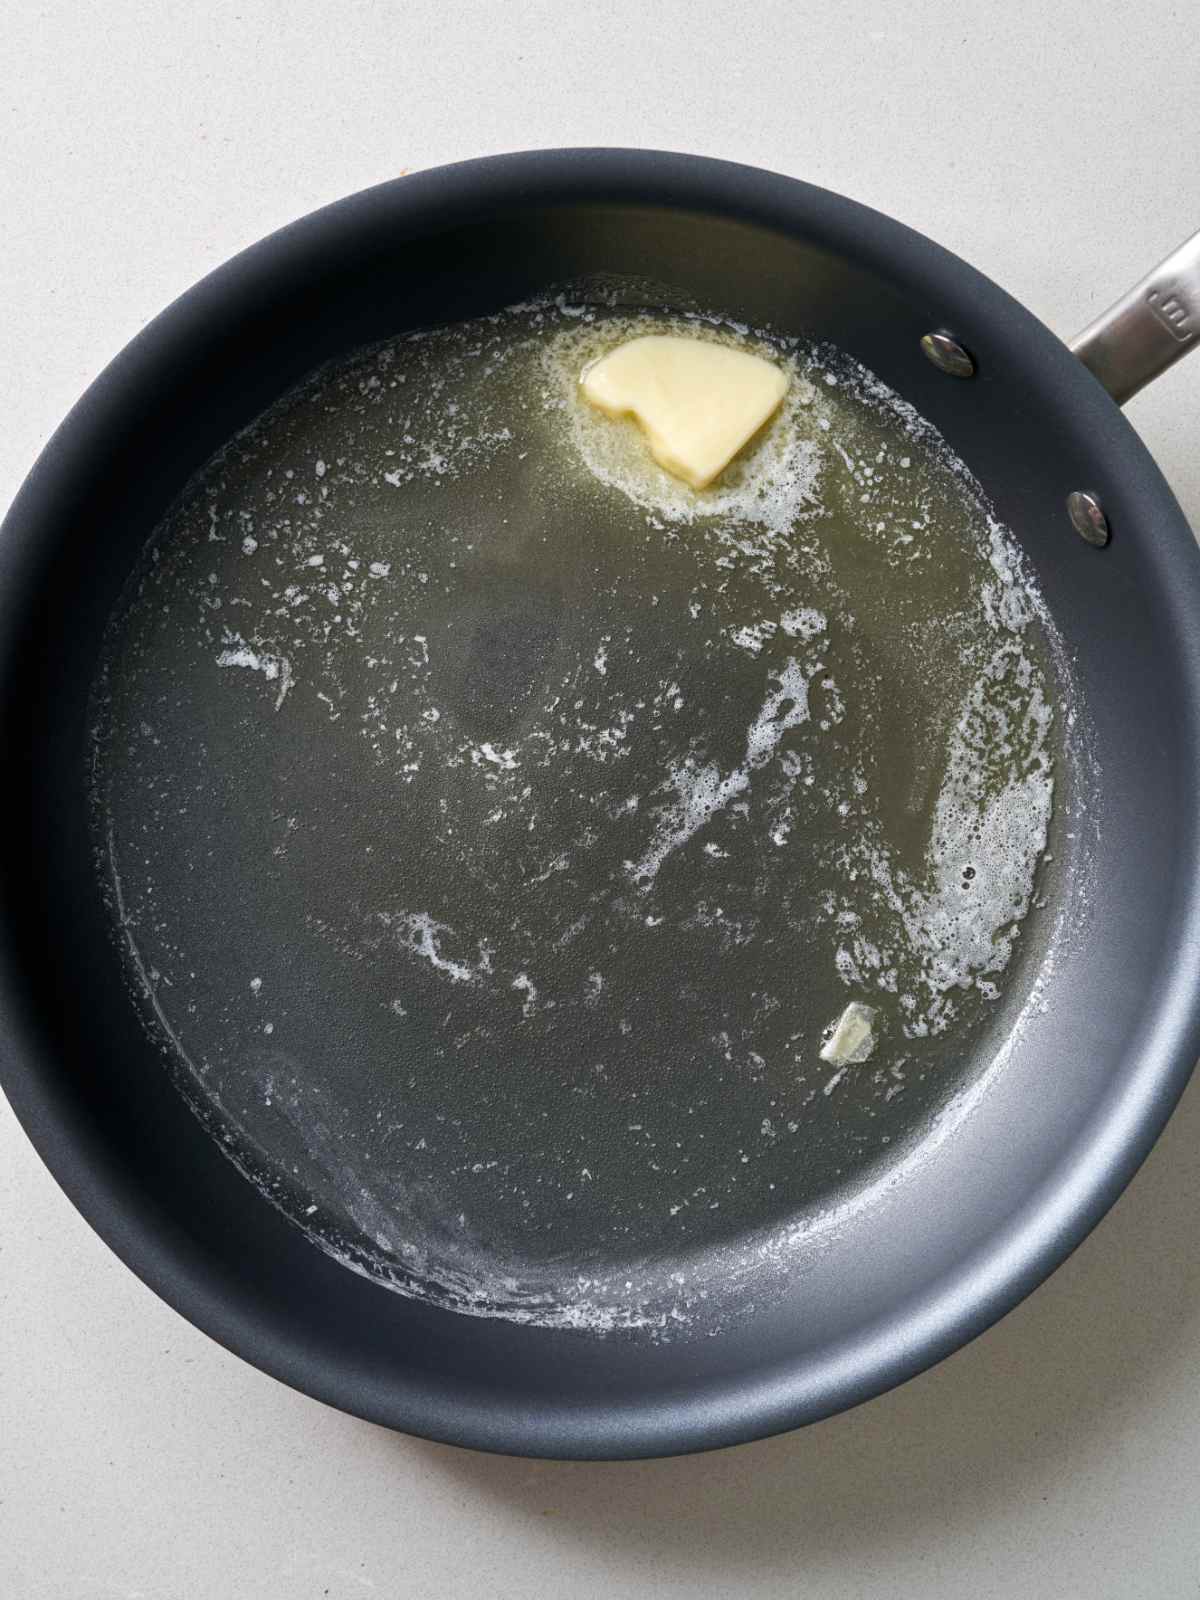 A knob of butter melting in a shiny black pan.